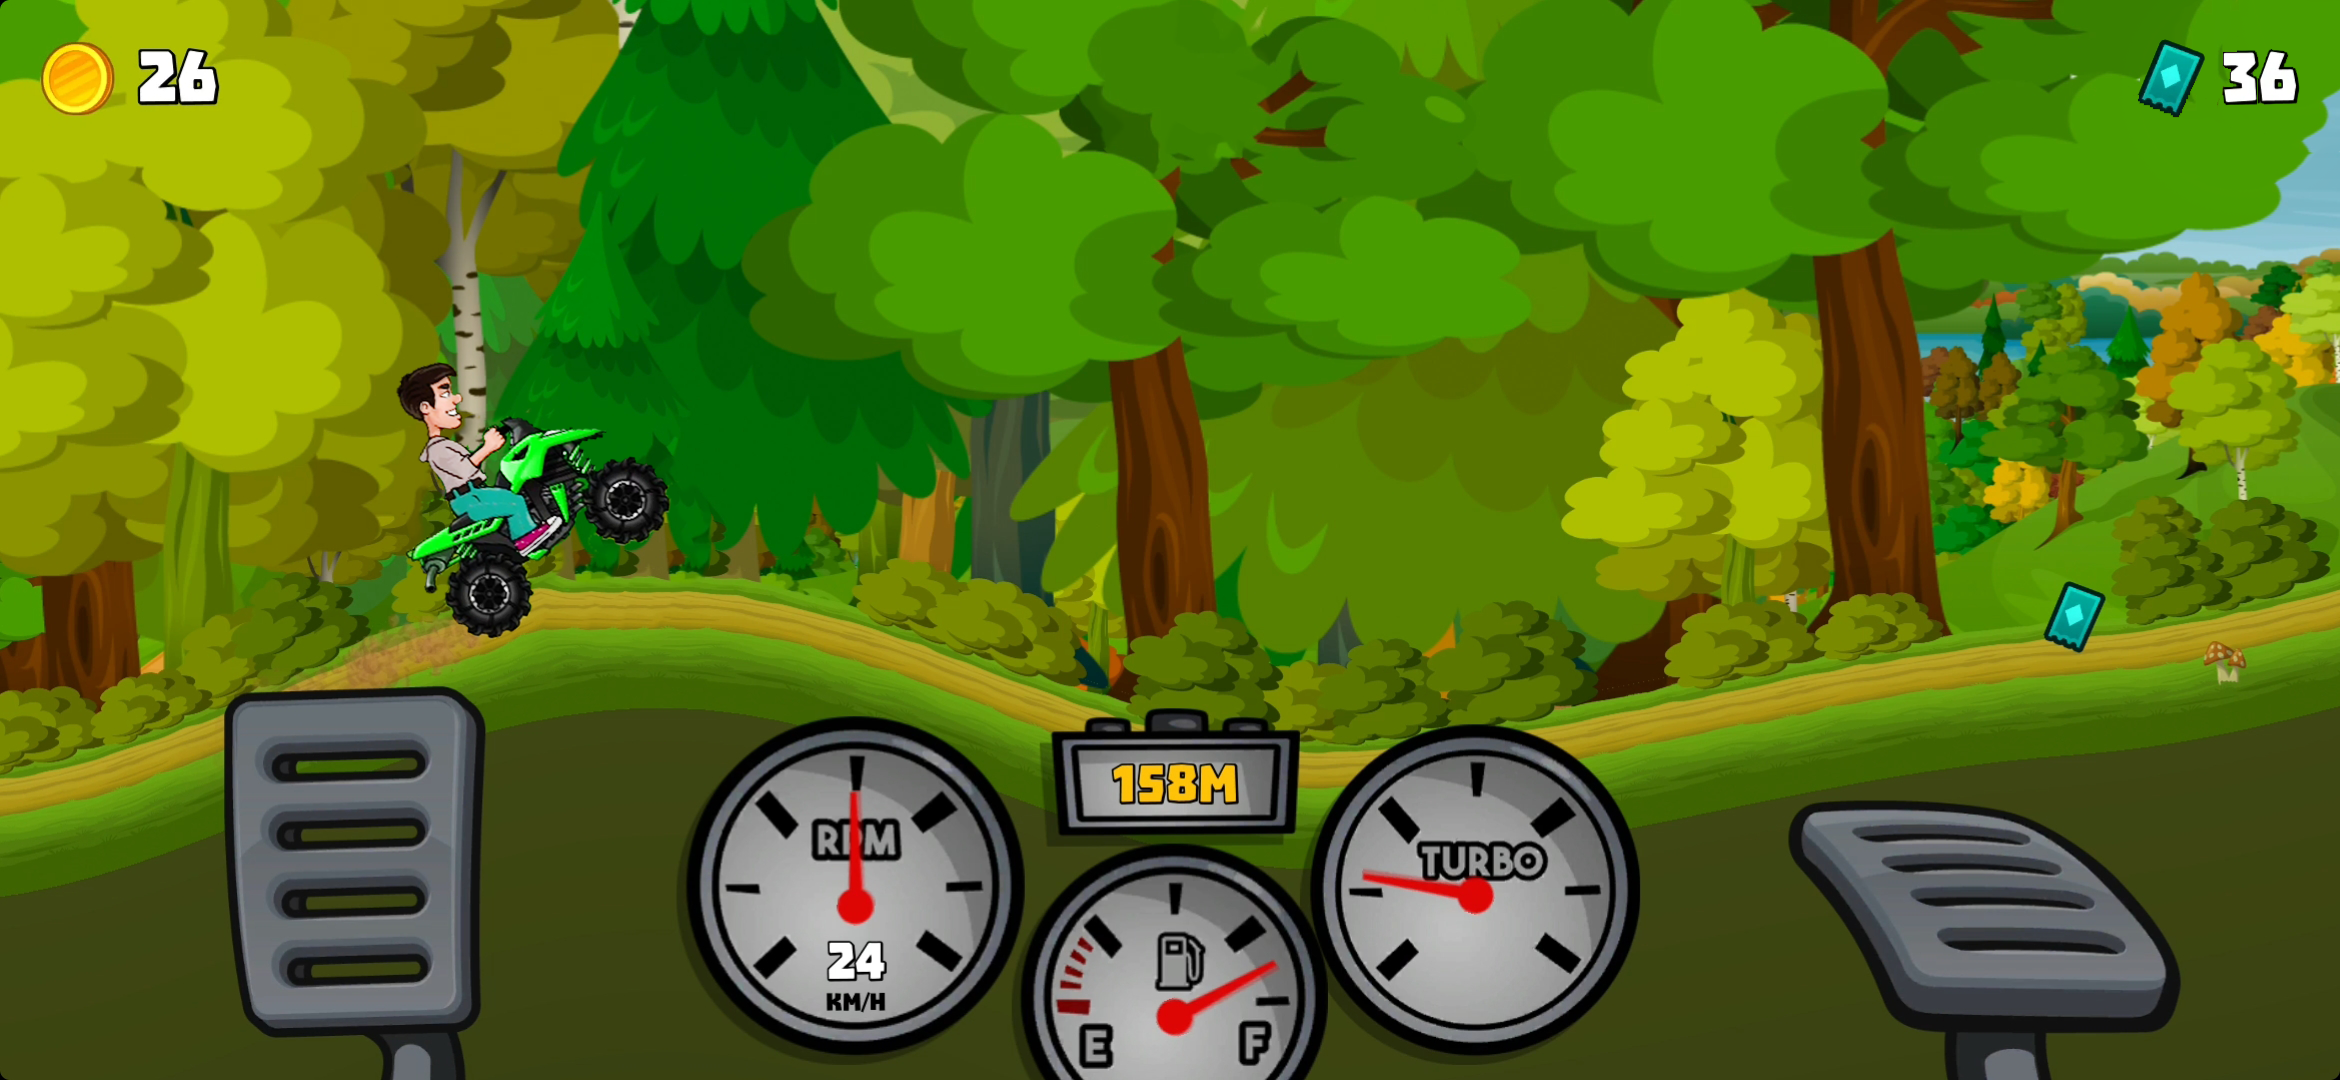 Drive over hills on the moon with physics-based game Hill Climb Racing